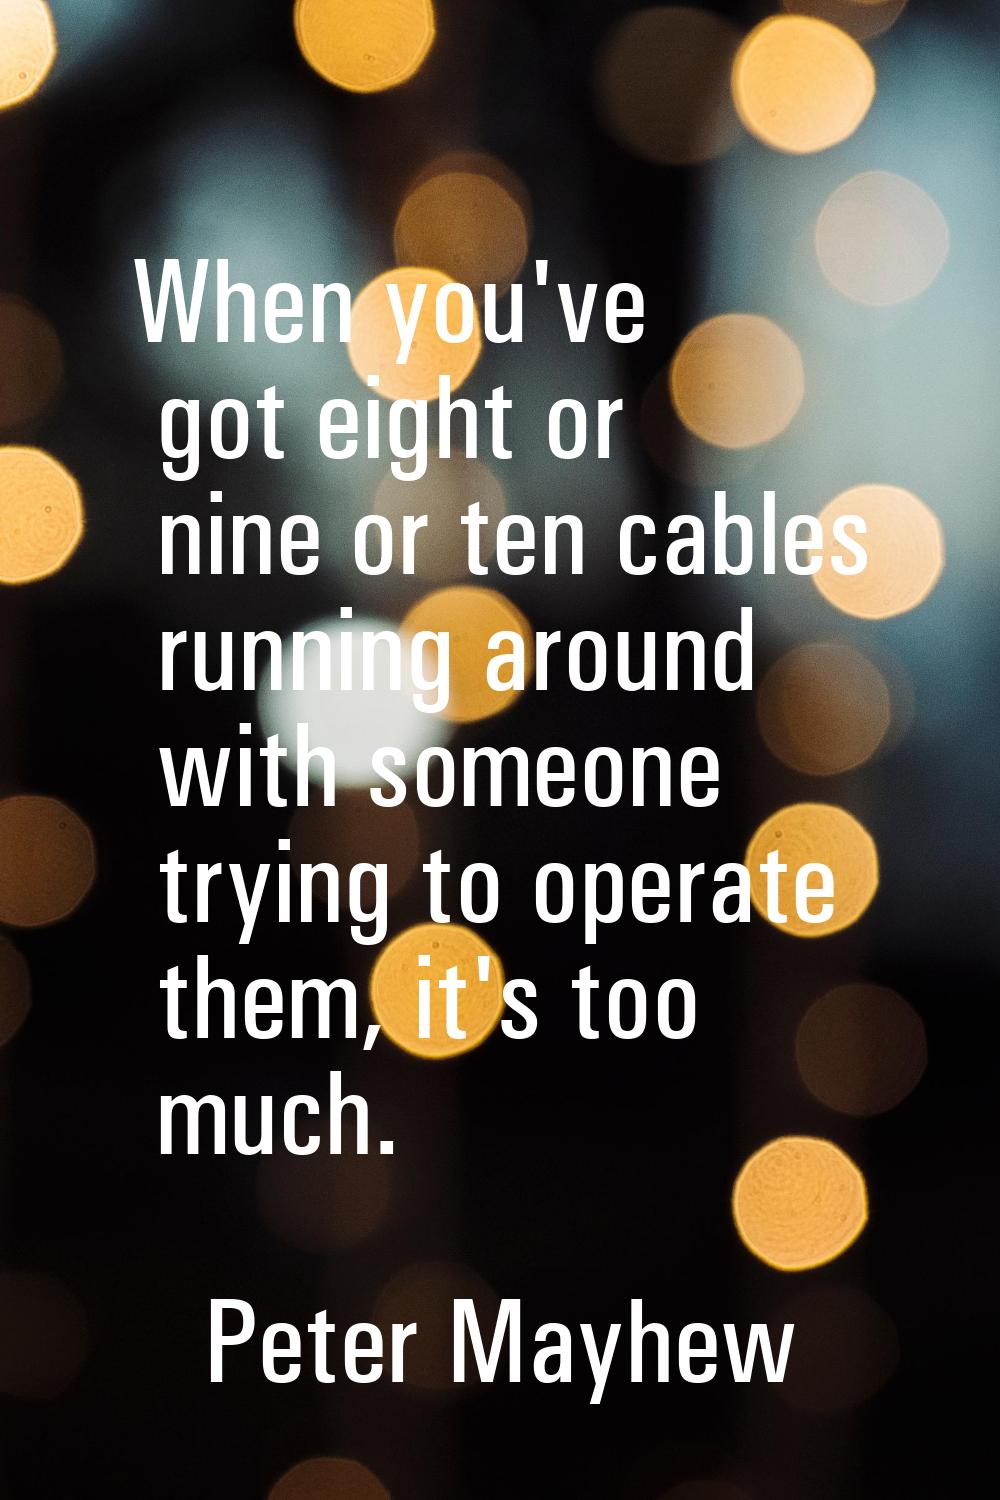 When you've got eight or nine or ten cables running around with someone trying to operate them, it'